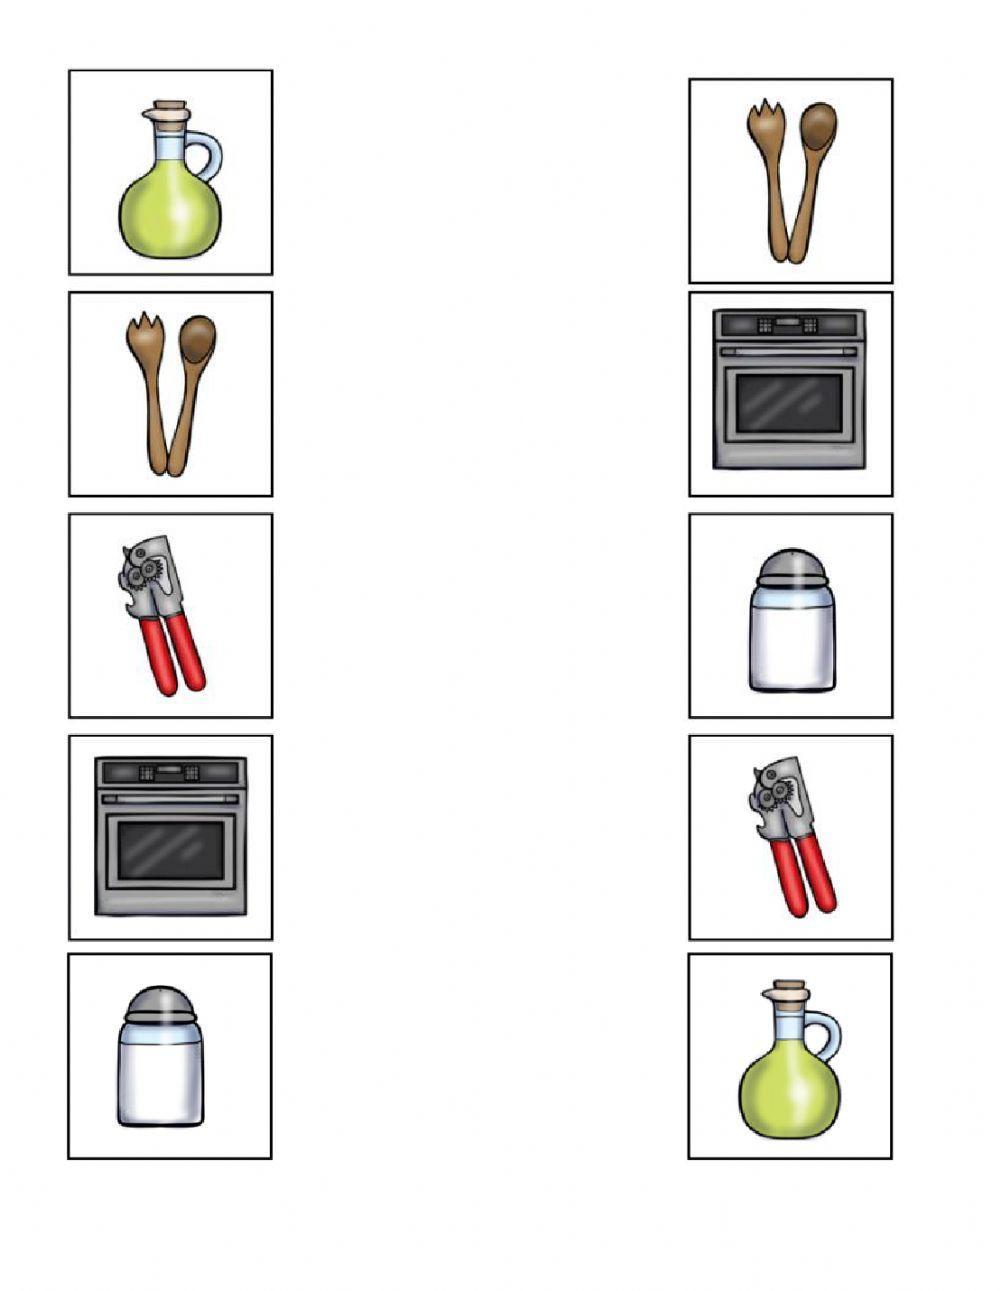 Matching Kitchen Item Pictures